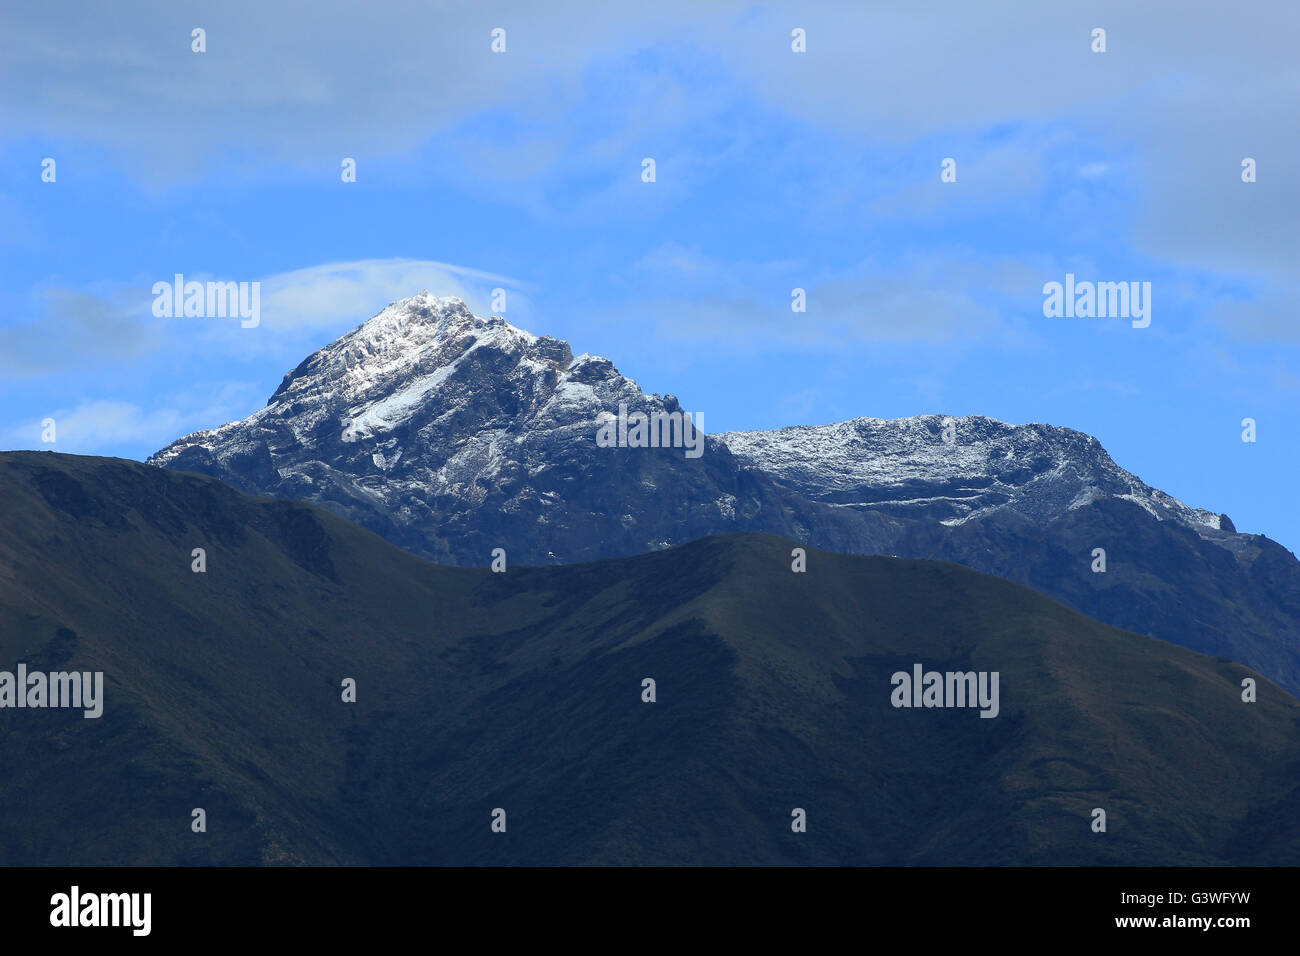 Snow on the summit of the volcano, Mount Cotacachi, in the Andes Mountains near Cotacachi, Ecuador Stock Photo